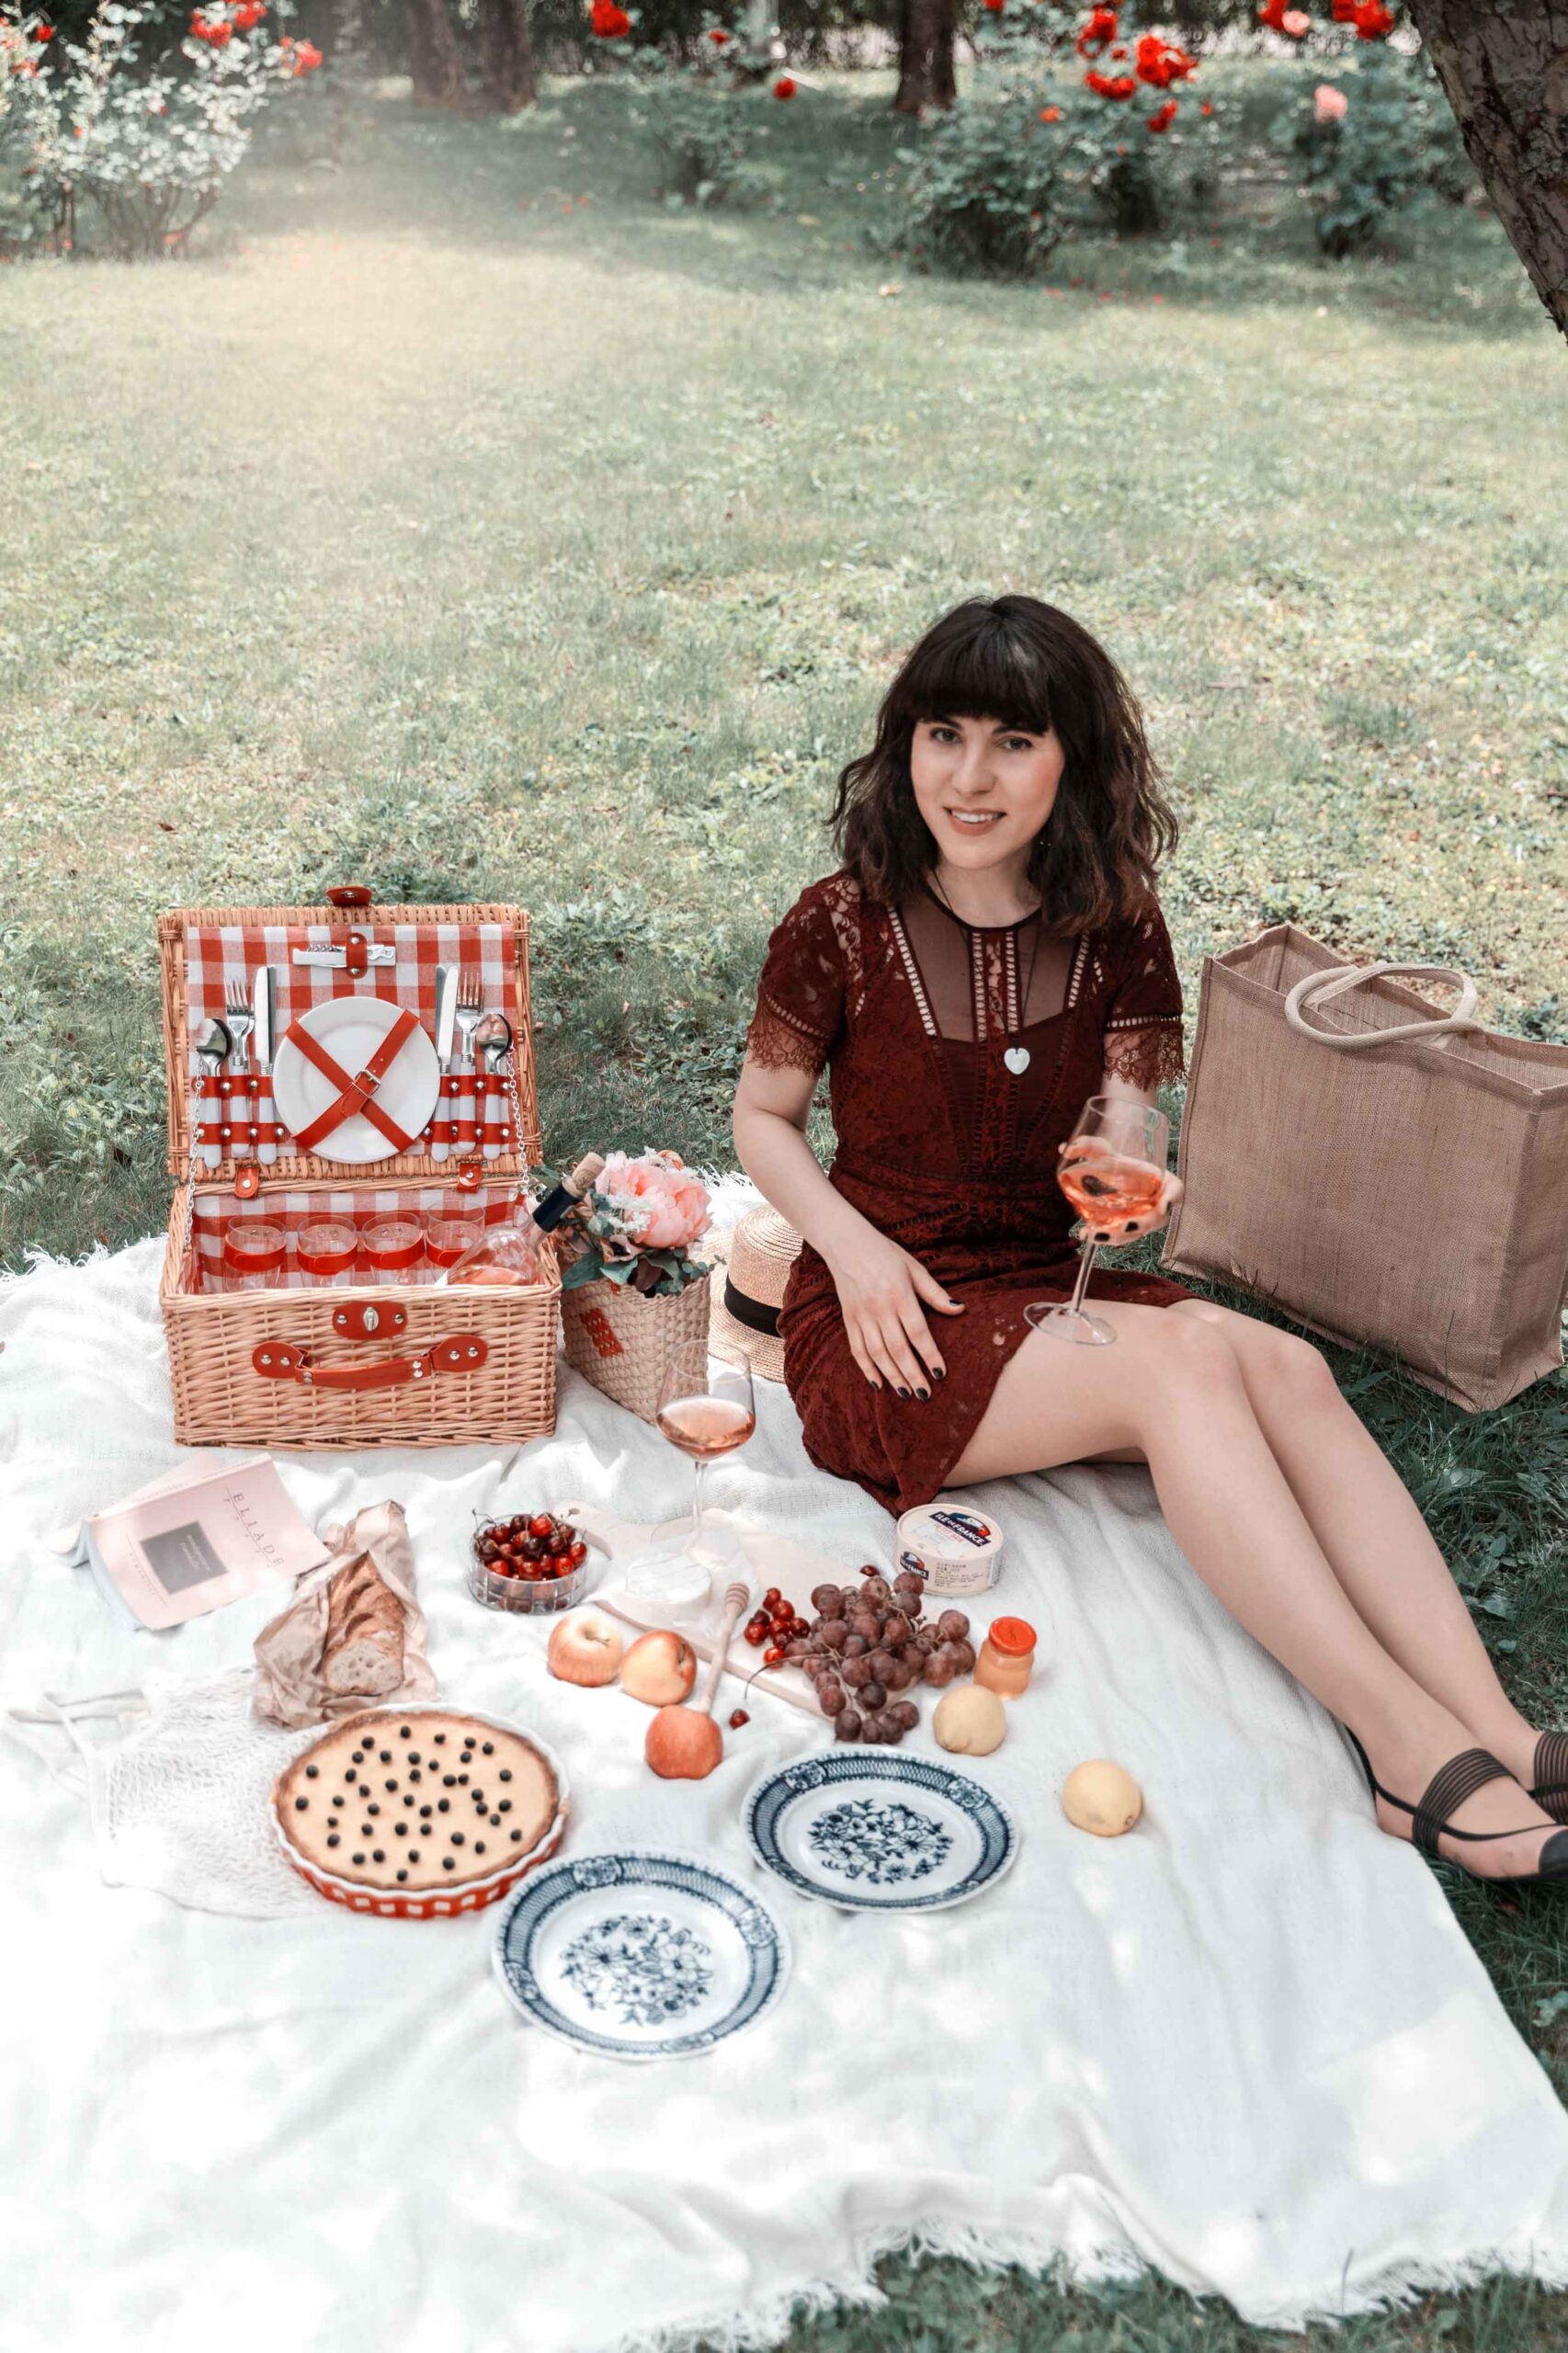 A French inspired picnic and the classic Lemon Tart recipe